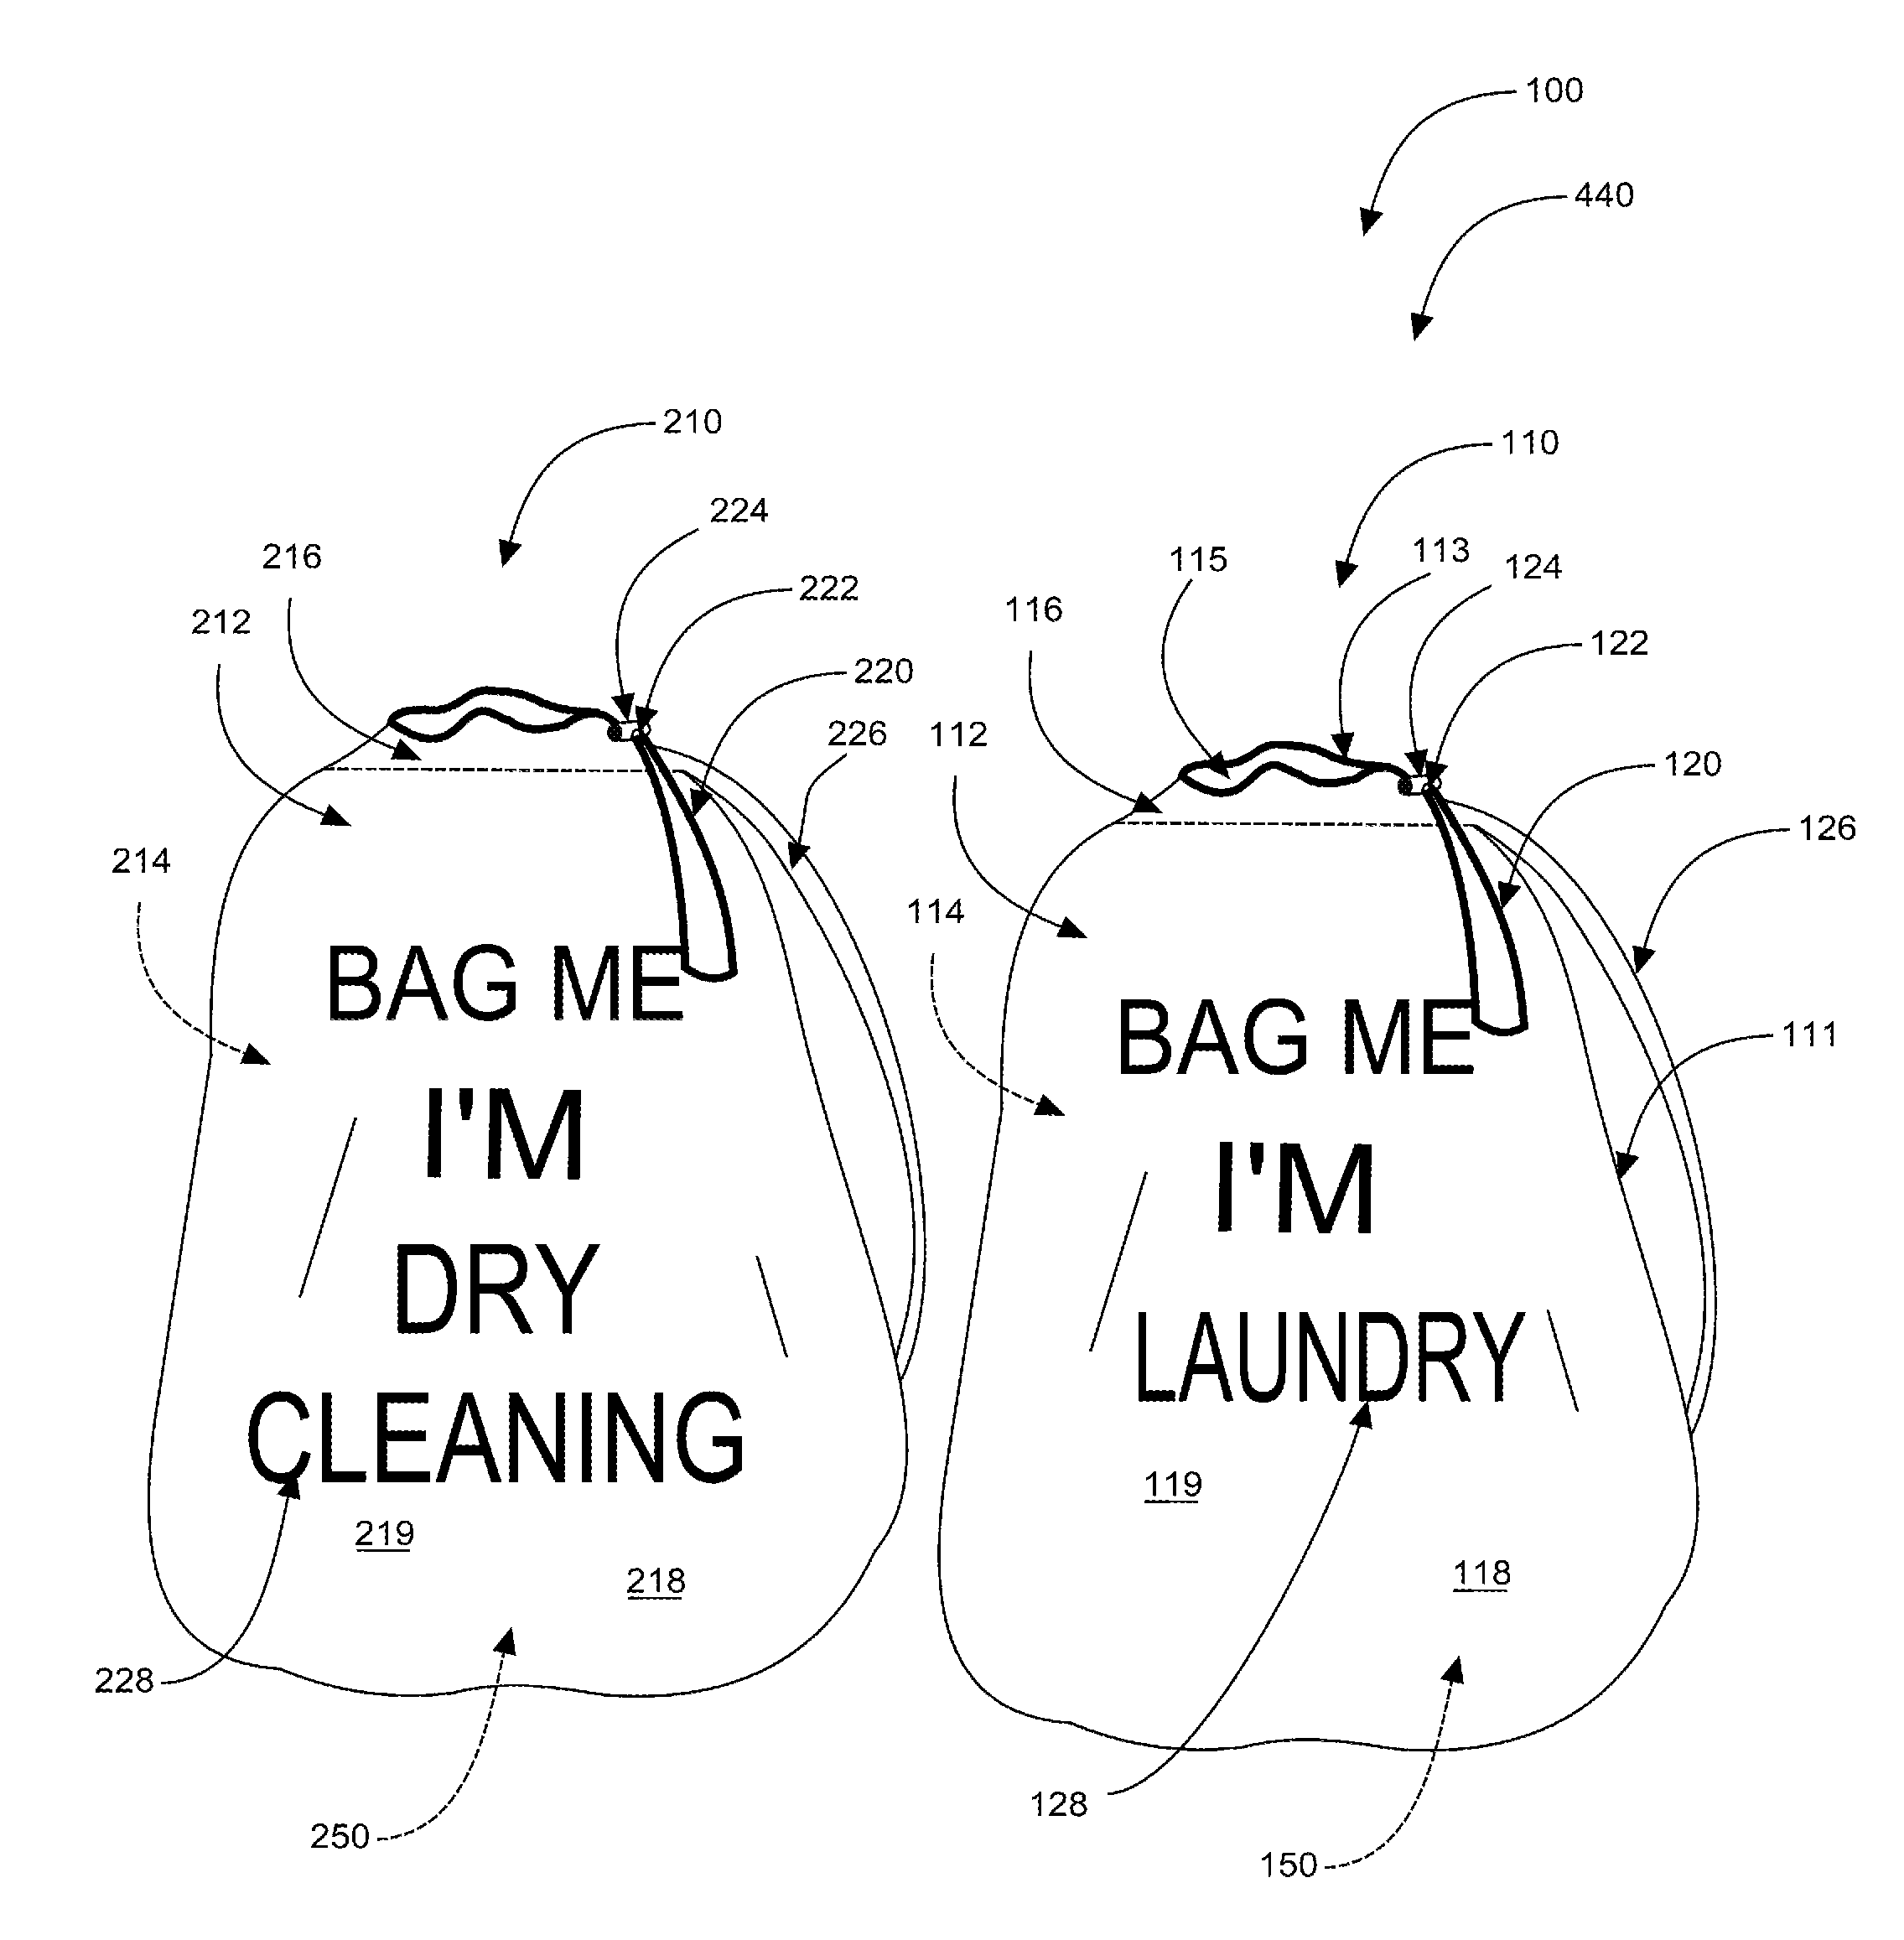 Bag me i'm laundry and bag me i'm dry cleaning systems